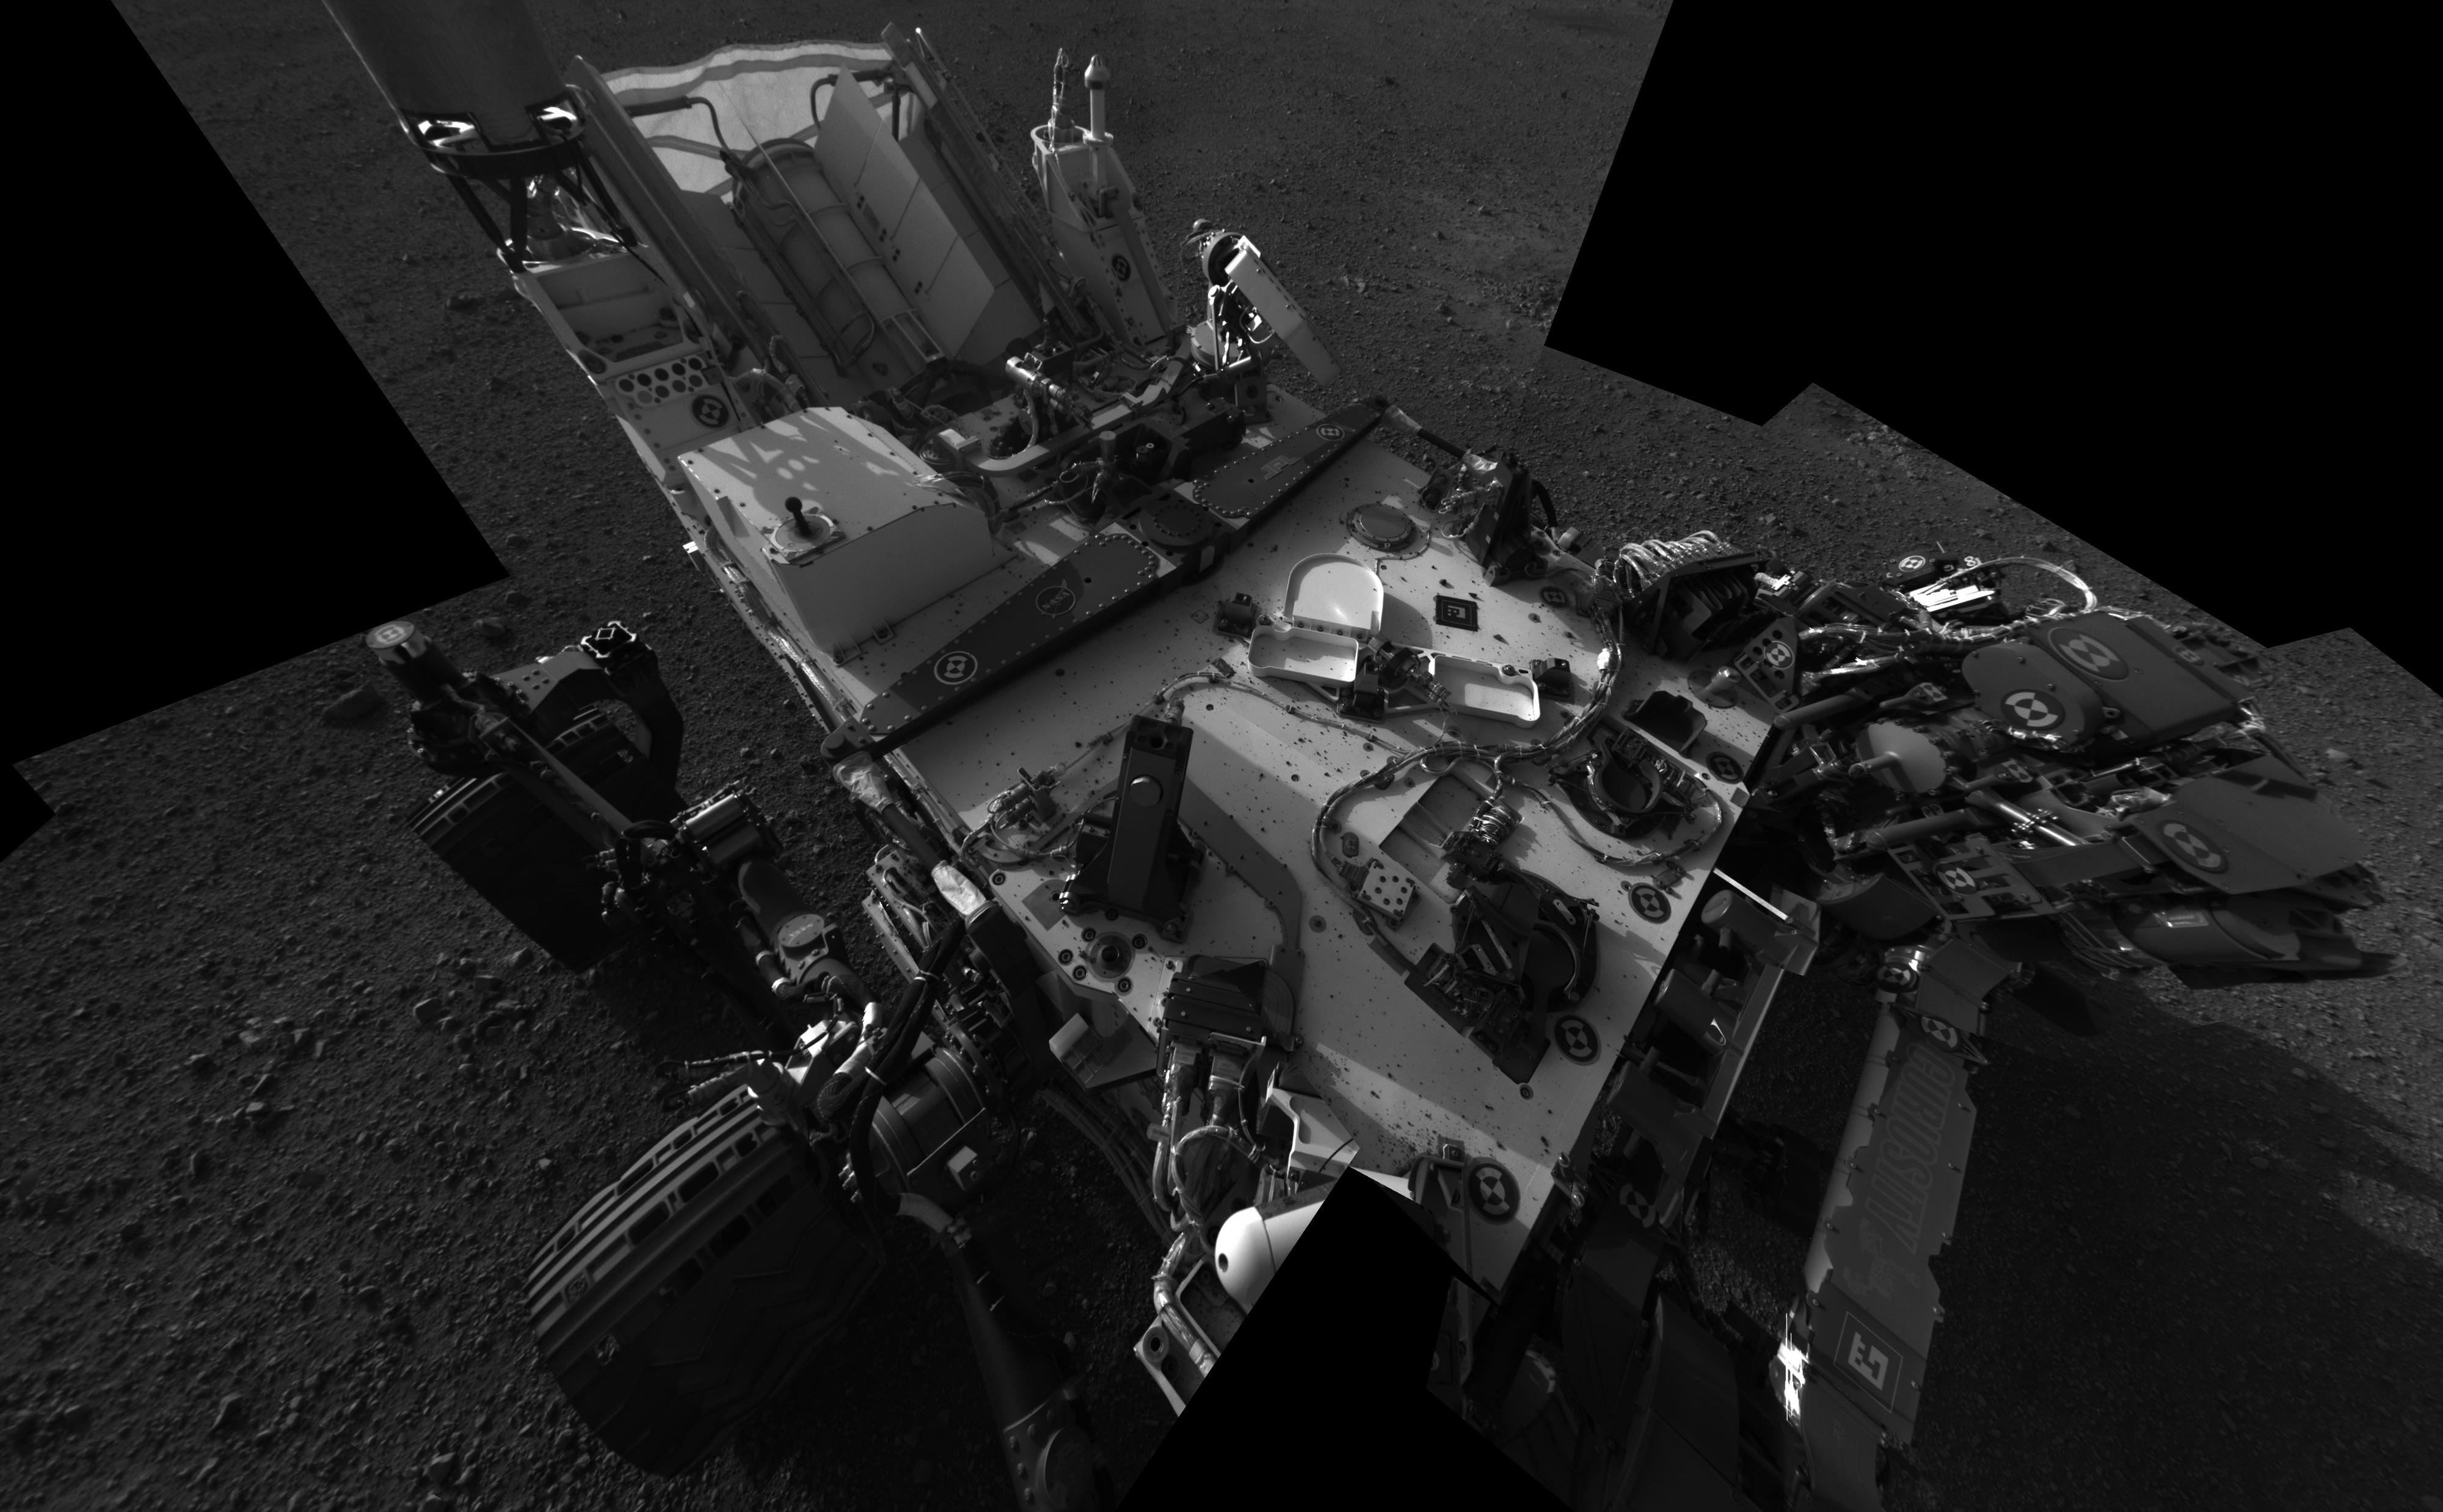 This full-resolution self-portrait shows the deck of NASA's Curiosity rover from the rover's Navigation camera.